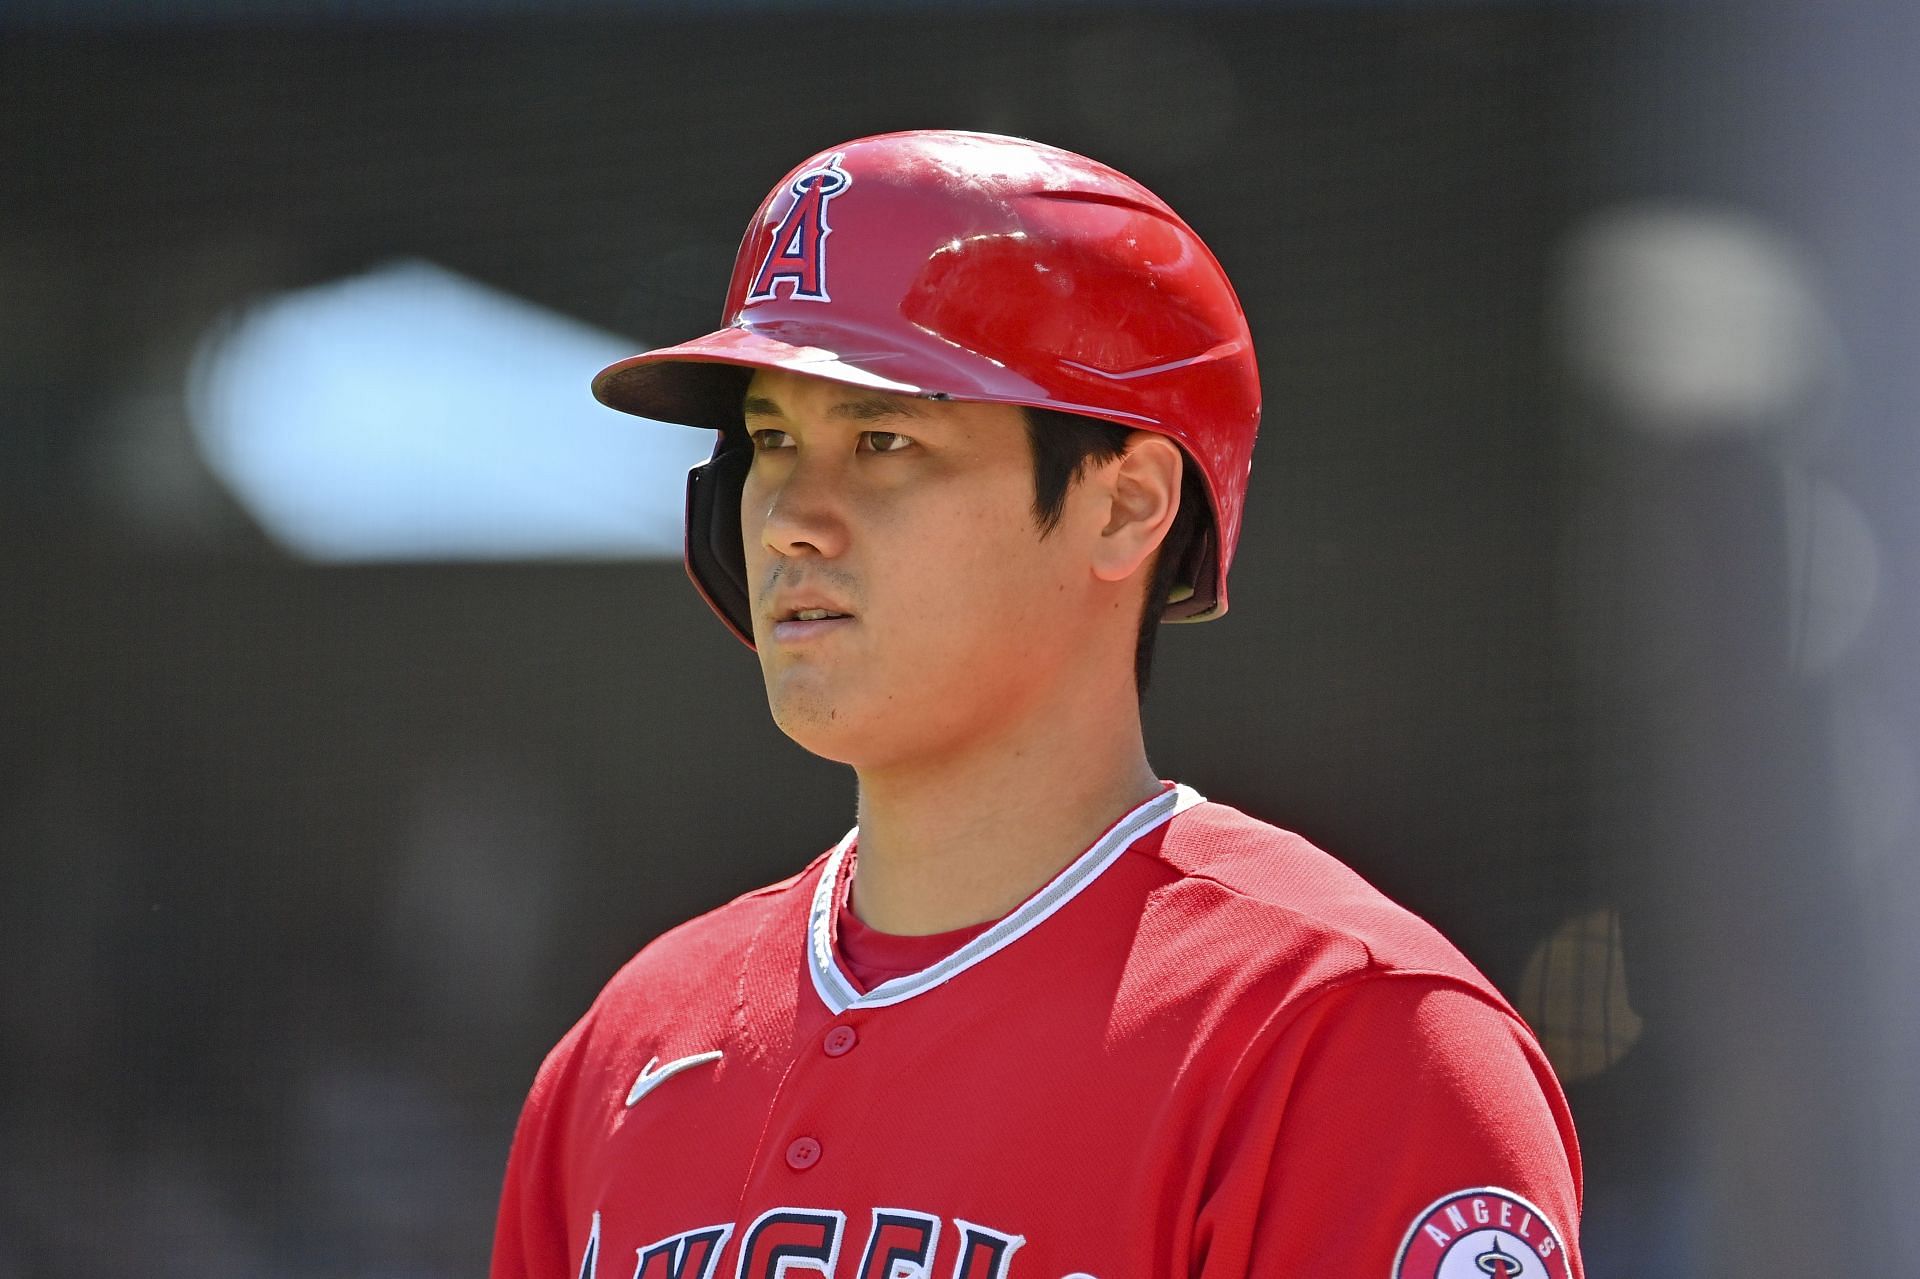 The Shohei Ohtani bidding war is about to get serious